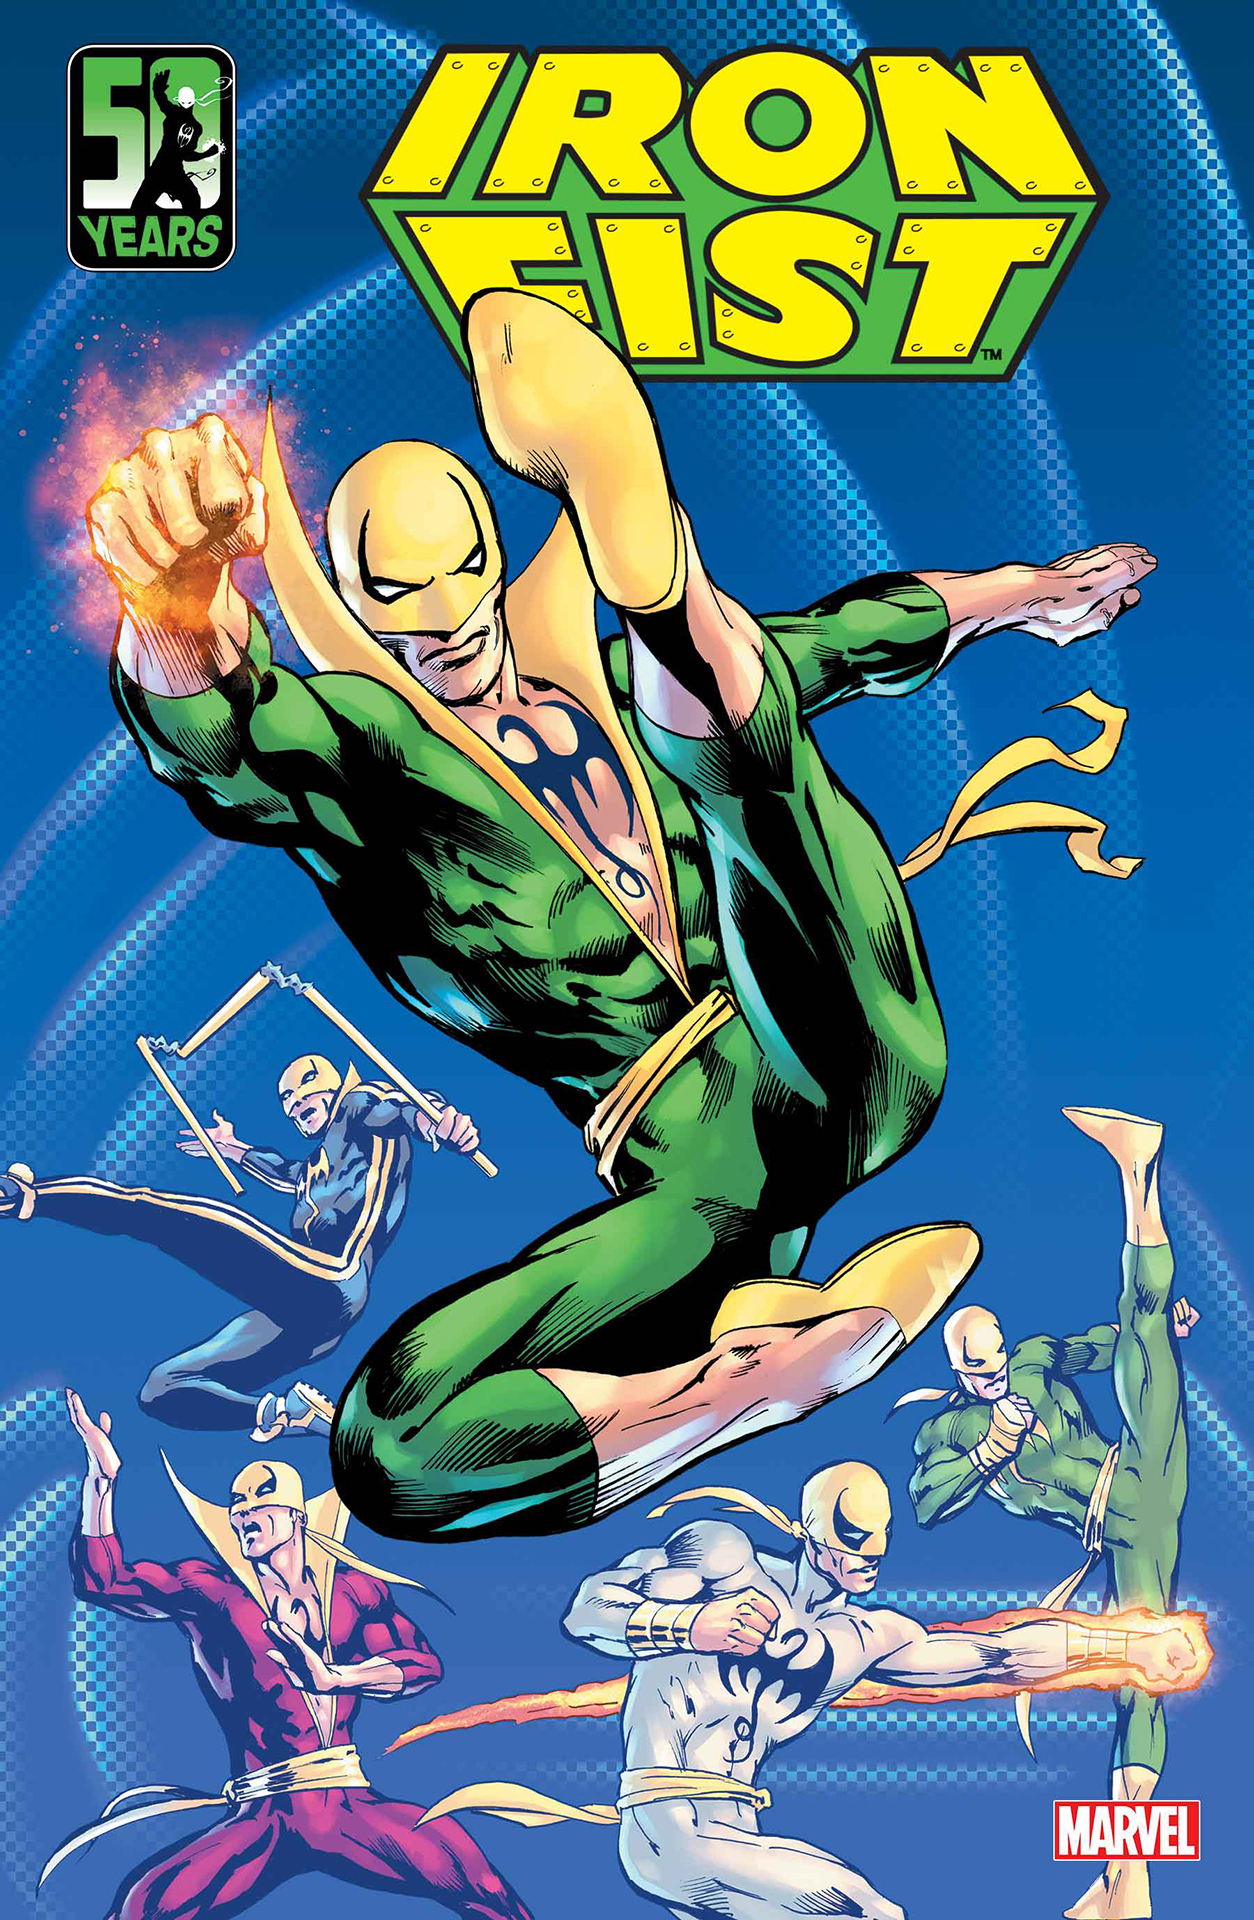 Iron Fist 50th Anniversary Special #1 cover art by Alan Davis